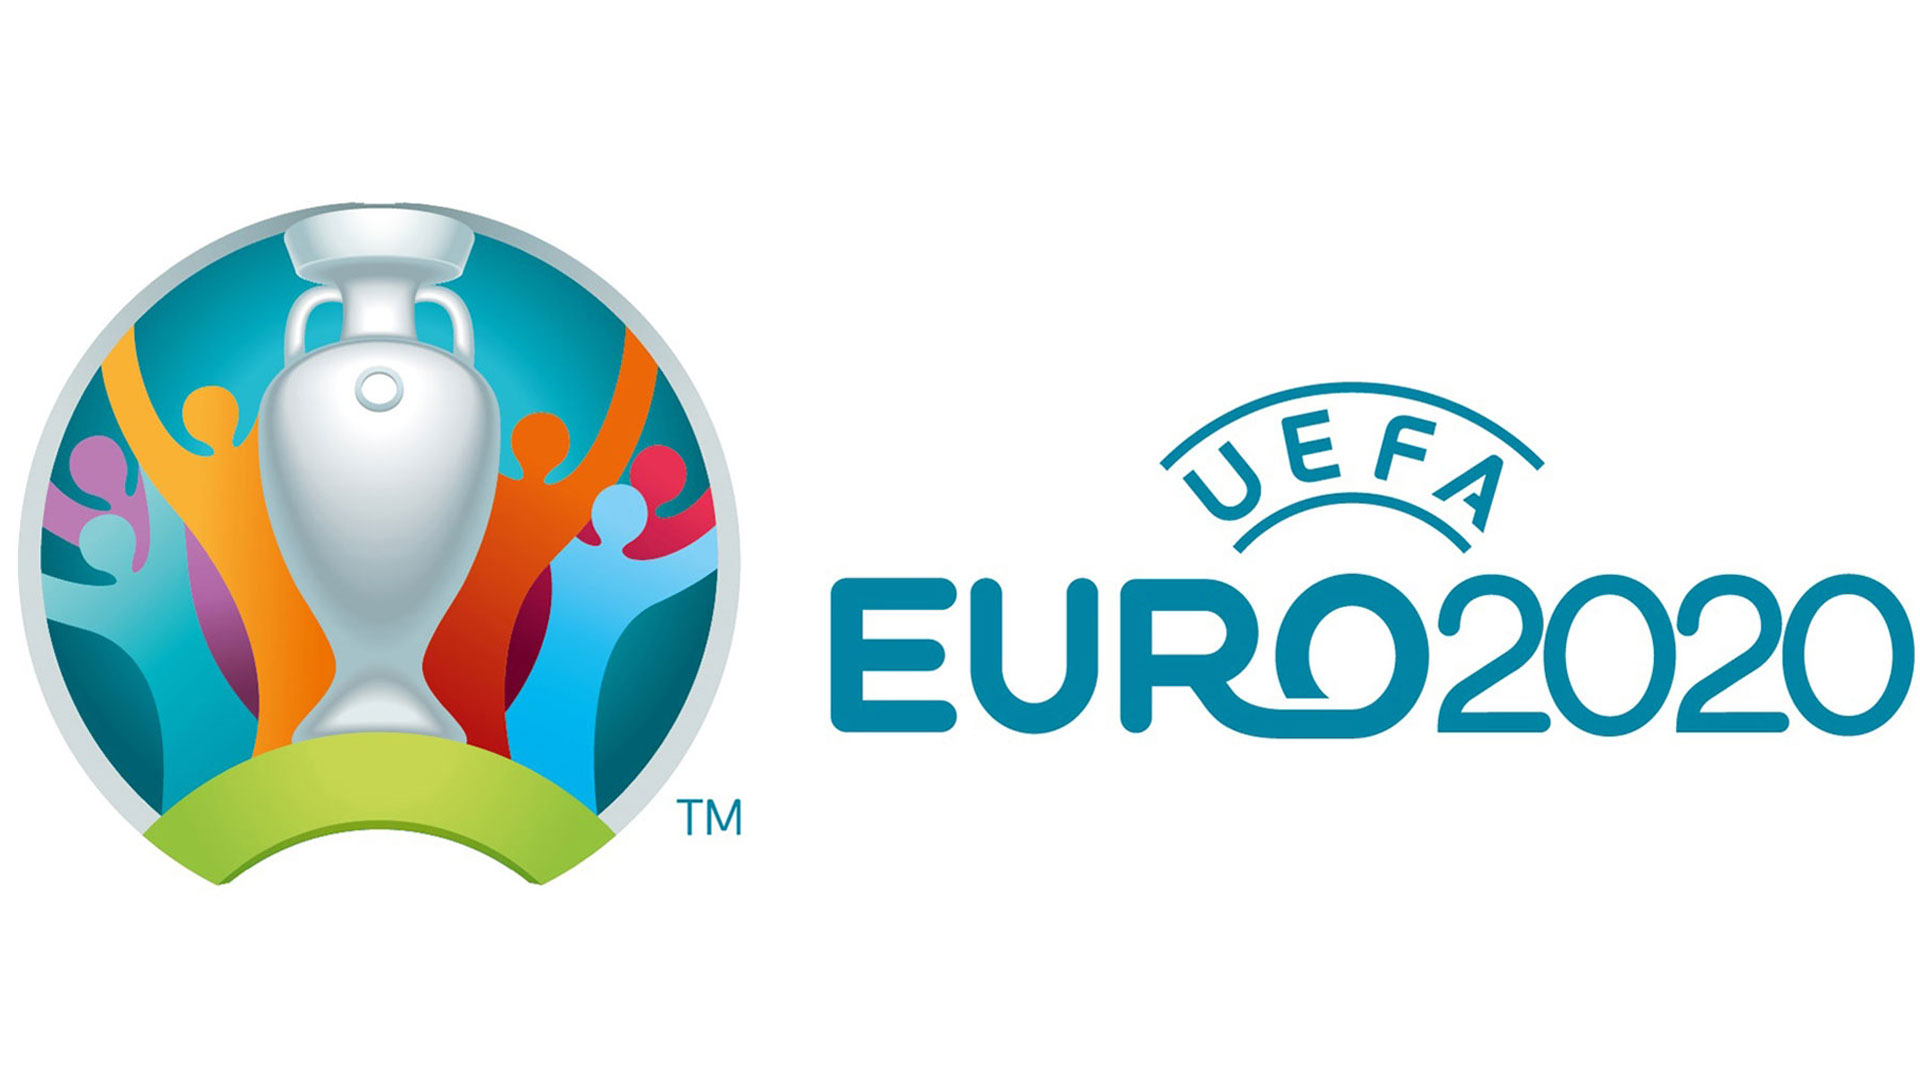 Germany, the Netherlands, Austria and Croatia have qualified for the 2020 European Championship